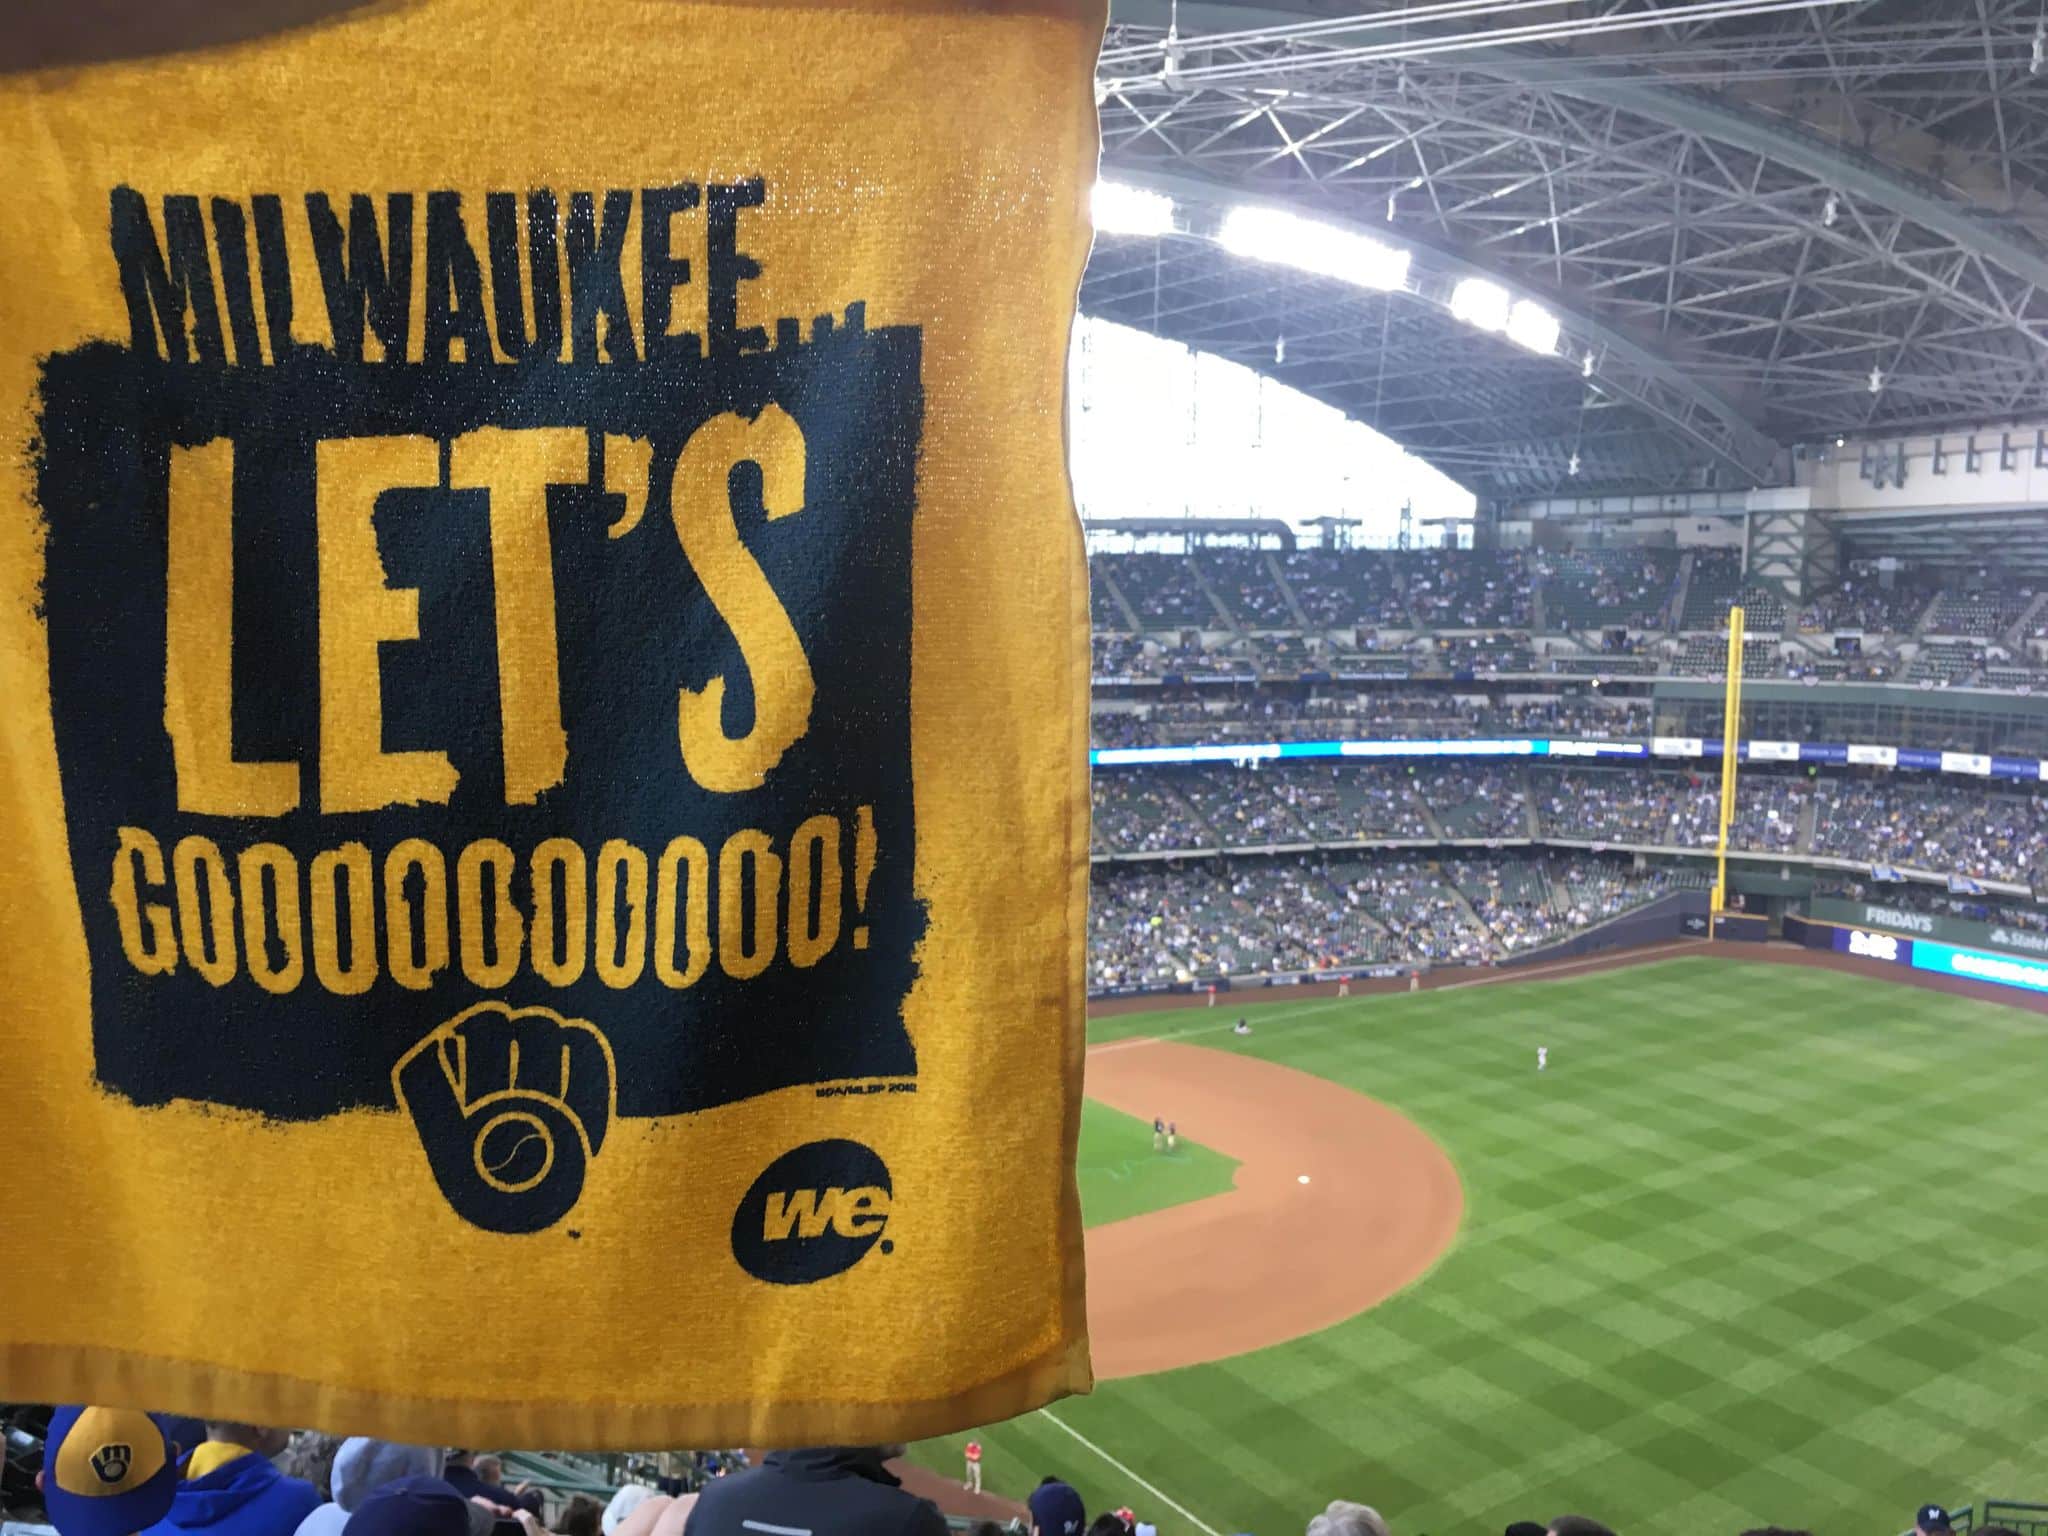 City of Milwaukee, Brewers celebrate playoff appearance - WTMJ